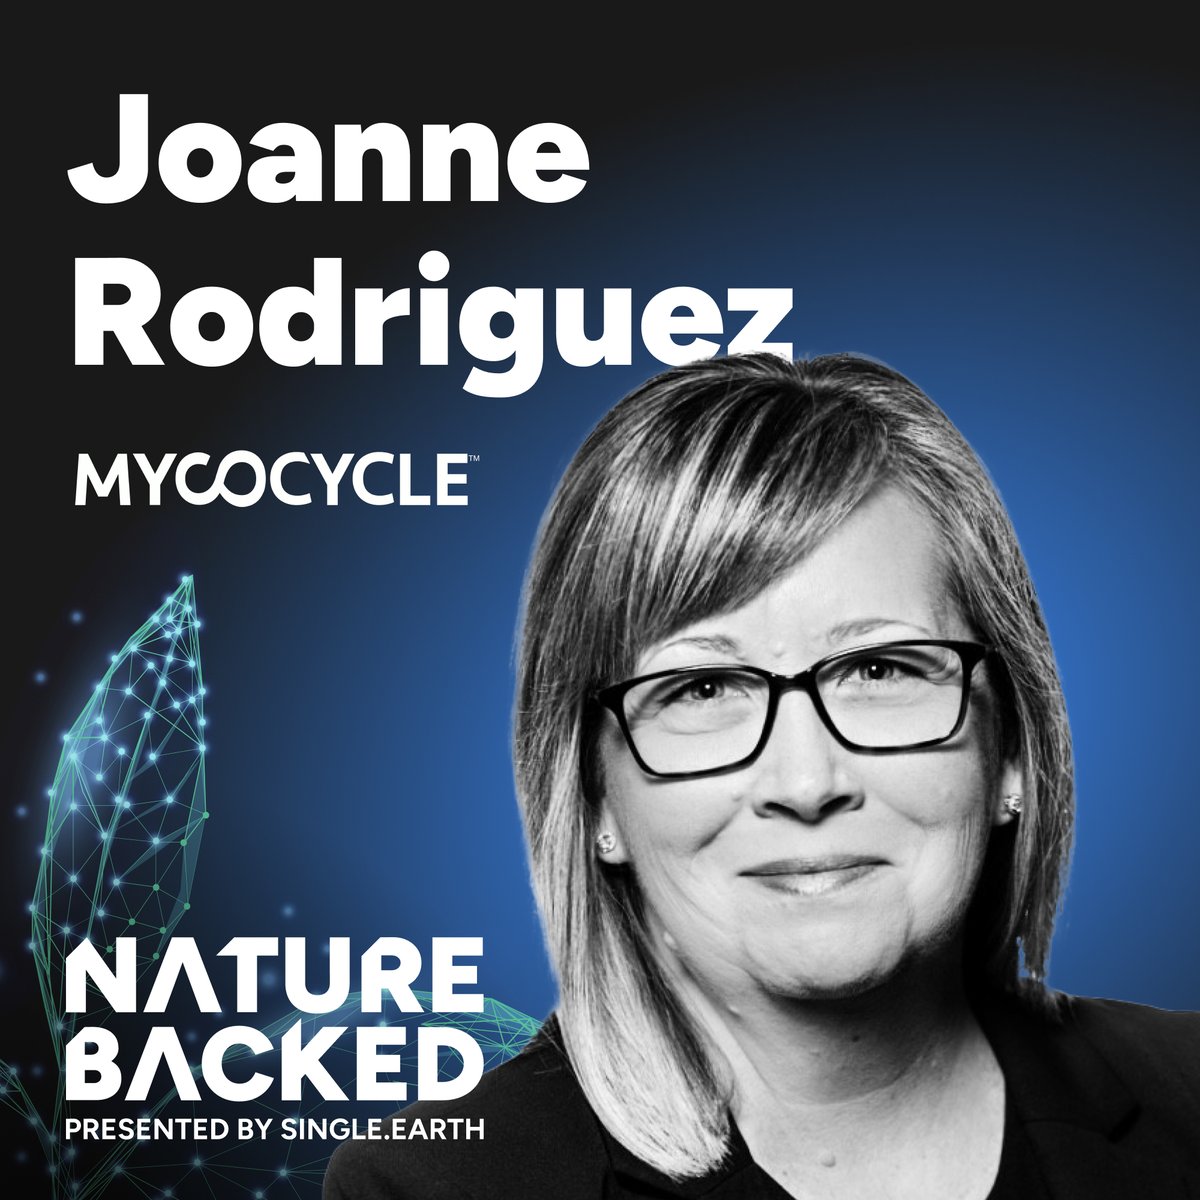 “There is no waste in nature - that’s a manmade construct.' says Joanne Rodriguez, founder of @mycocycle, in the fresh @Naturebacked #podcast #goldenquotes @SingleEarth1 naturebacked.com/1918037/120722…